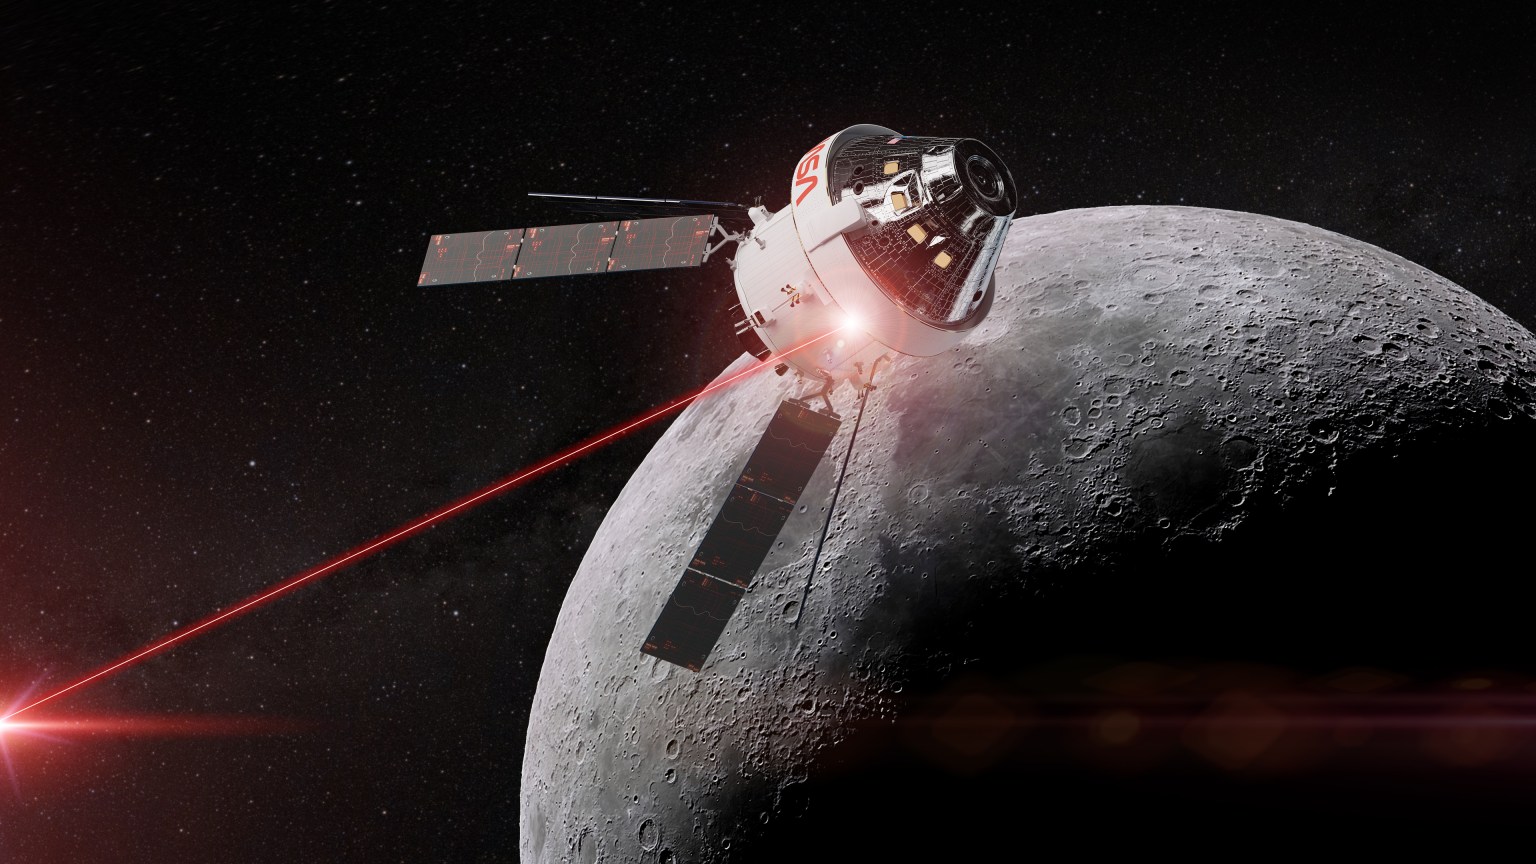 A visualization of the Orion spacecraft orbiting the Moon while utilizing a new cutting-edge technology, the Orion Artemis II Communications System (O2O).